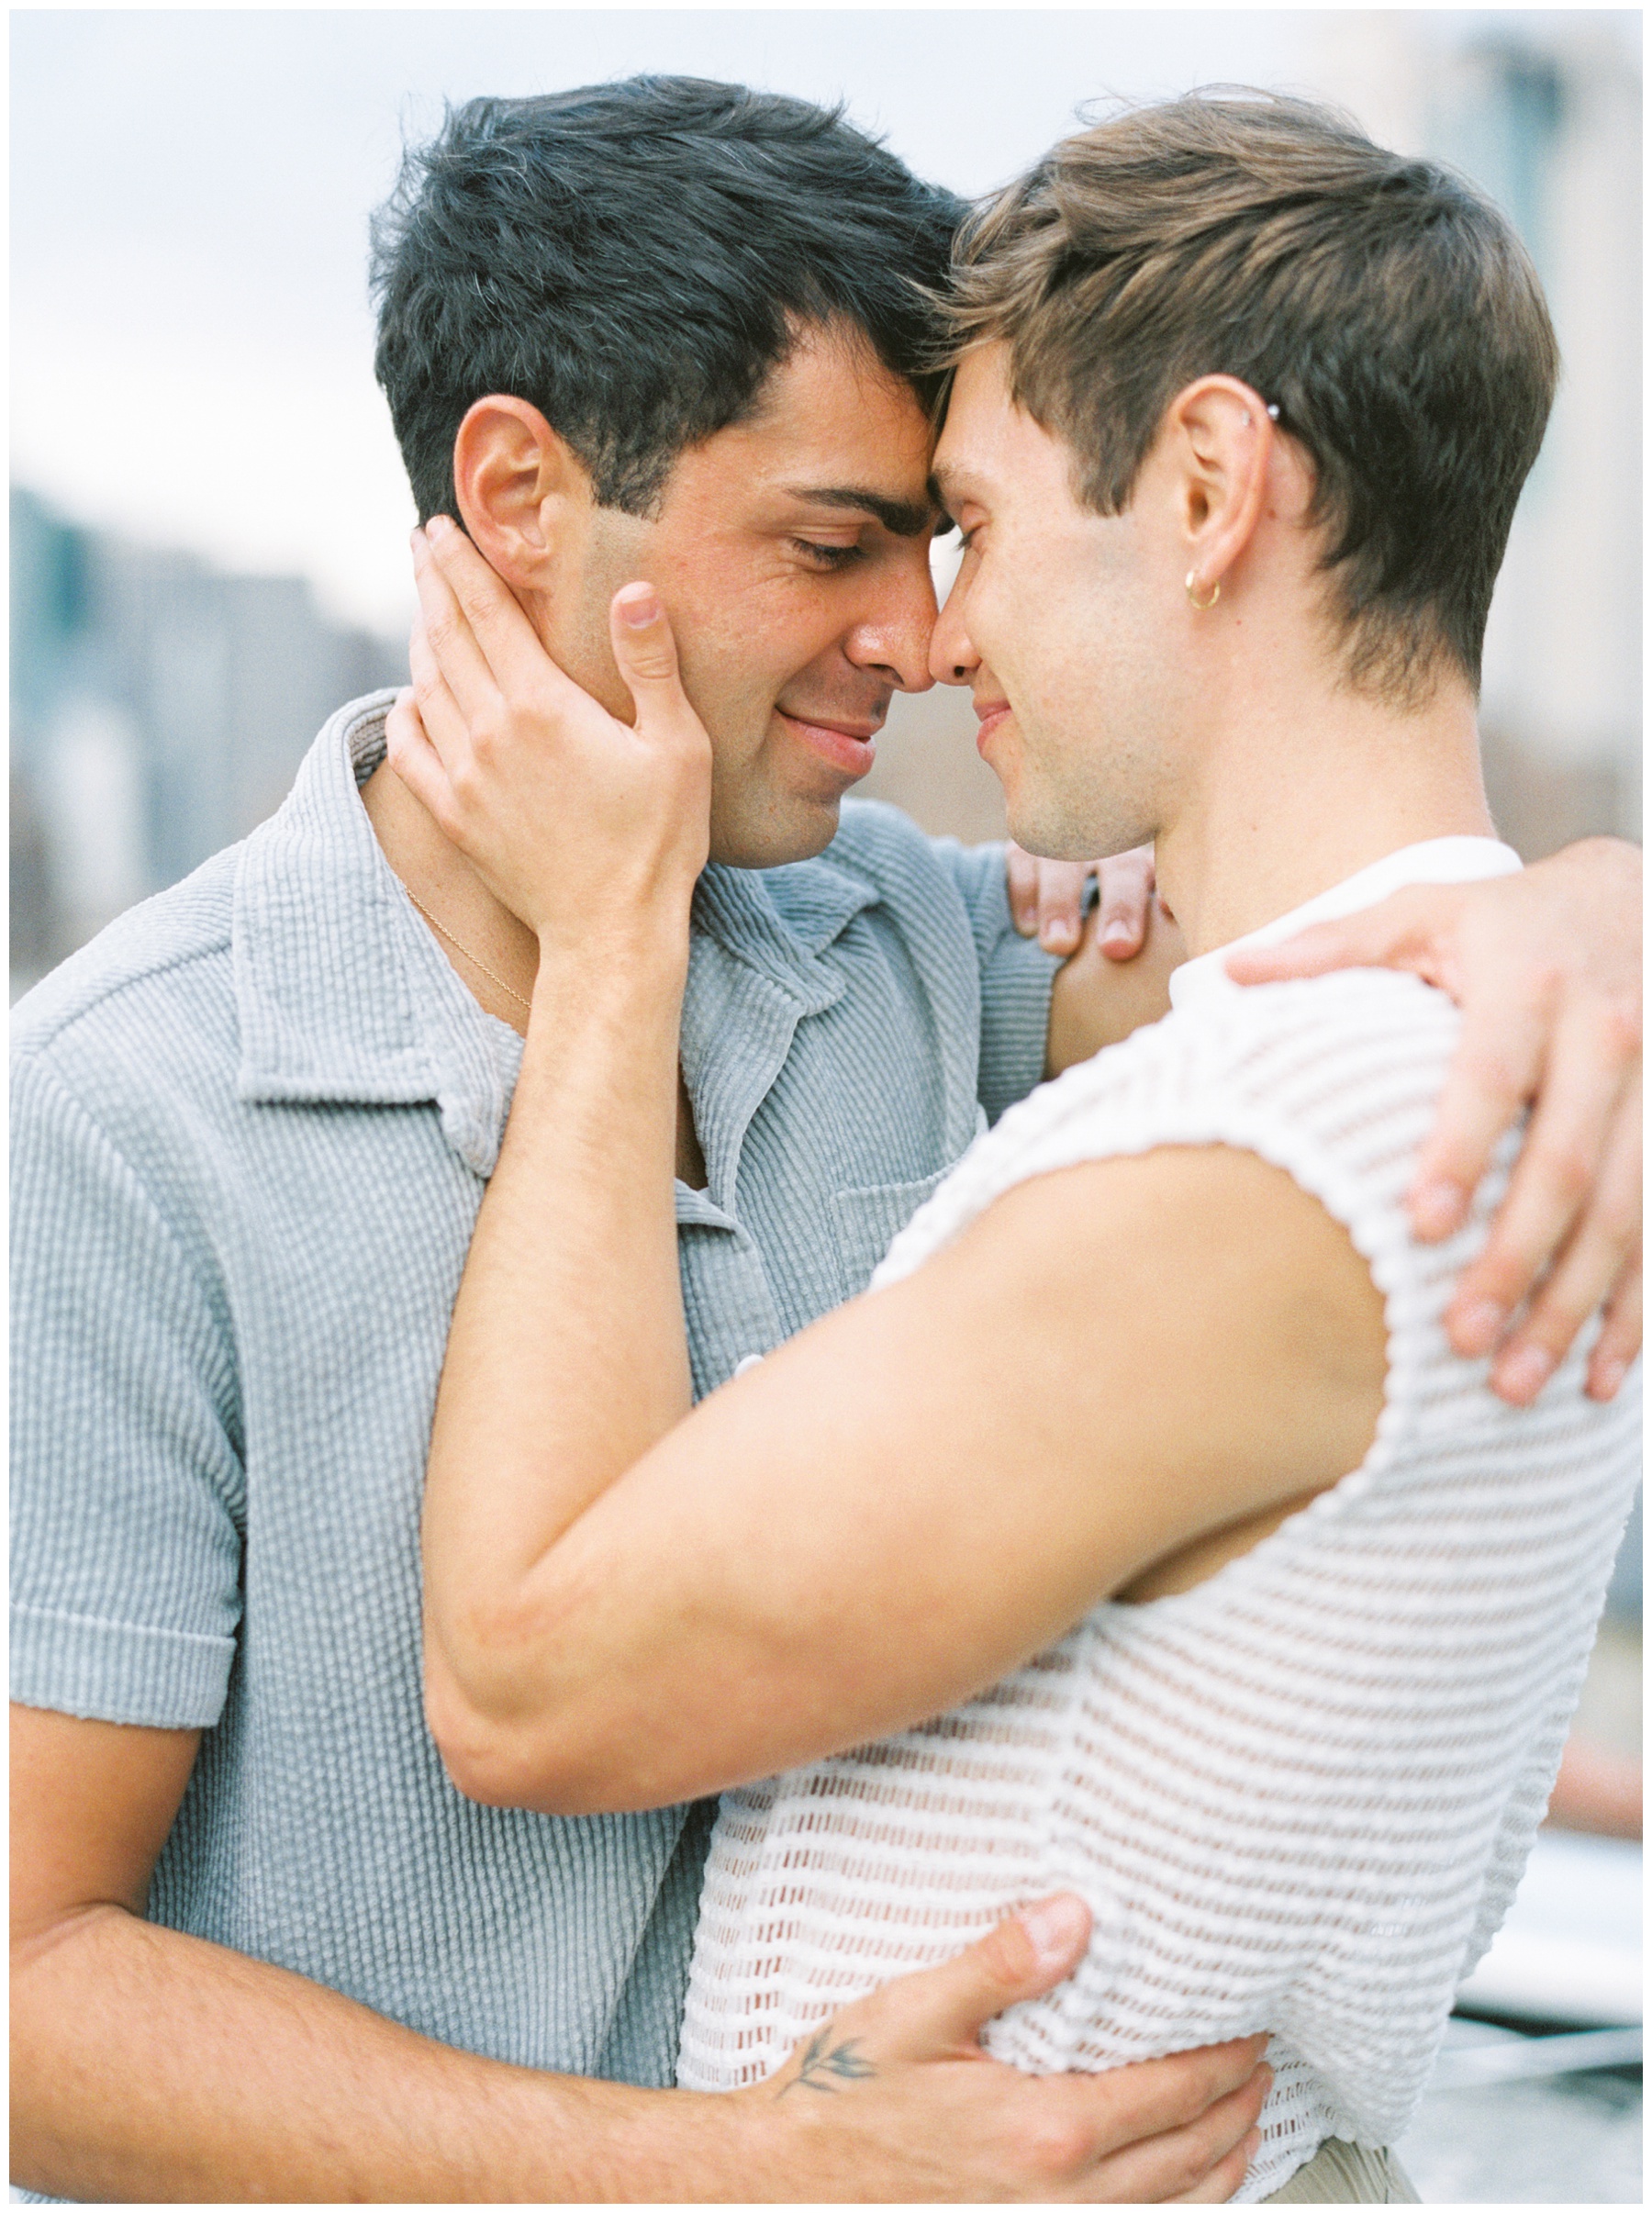 men hug leaning heads together nuzzling noses during New York City engagement session